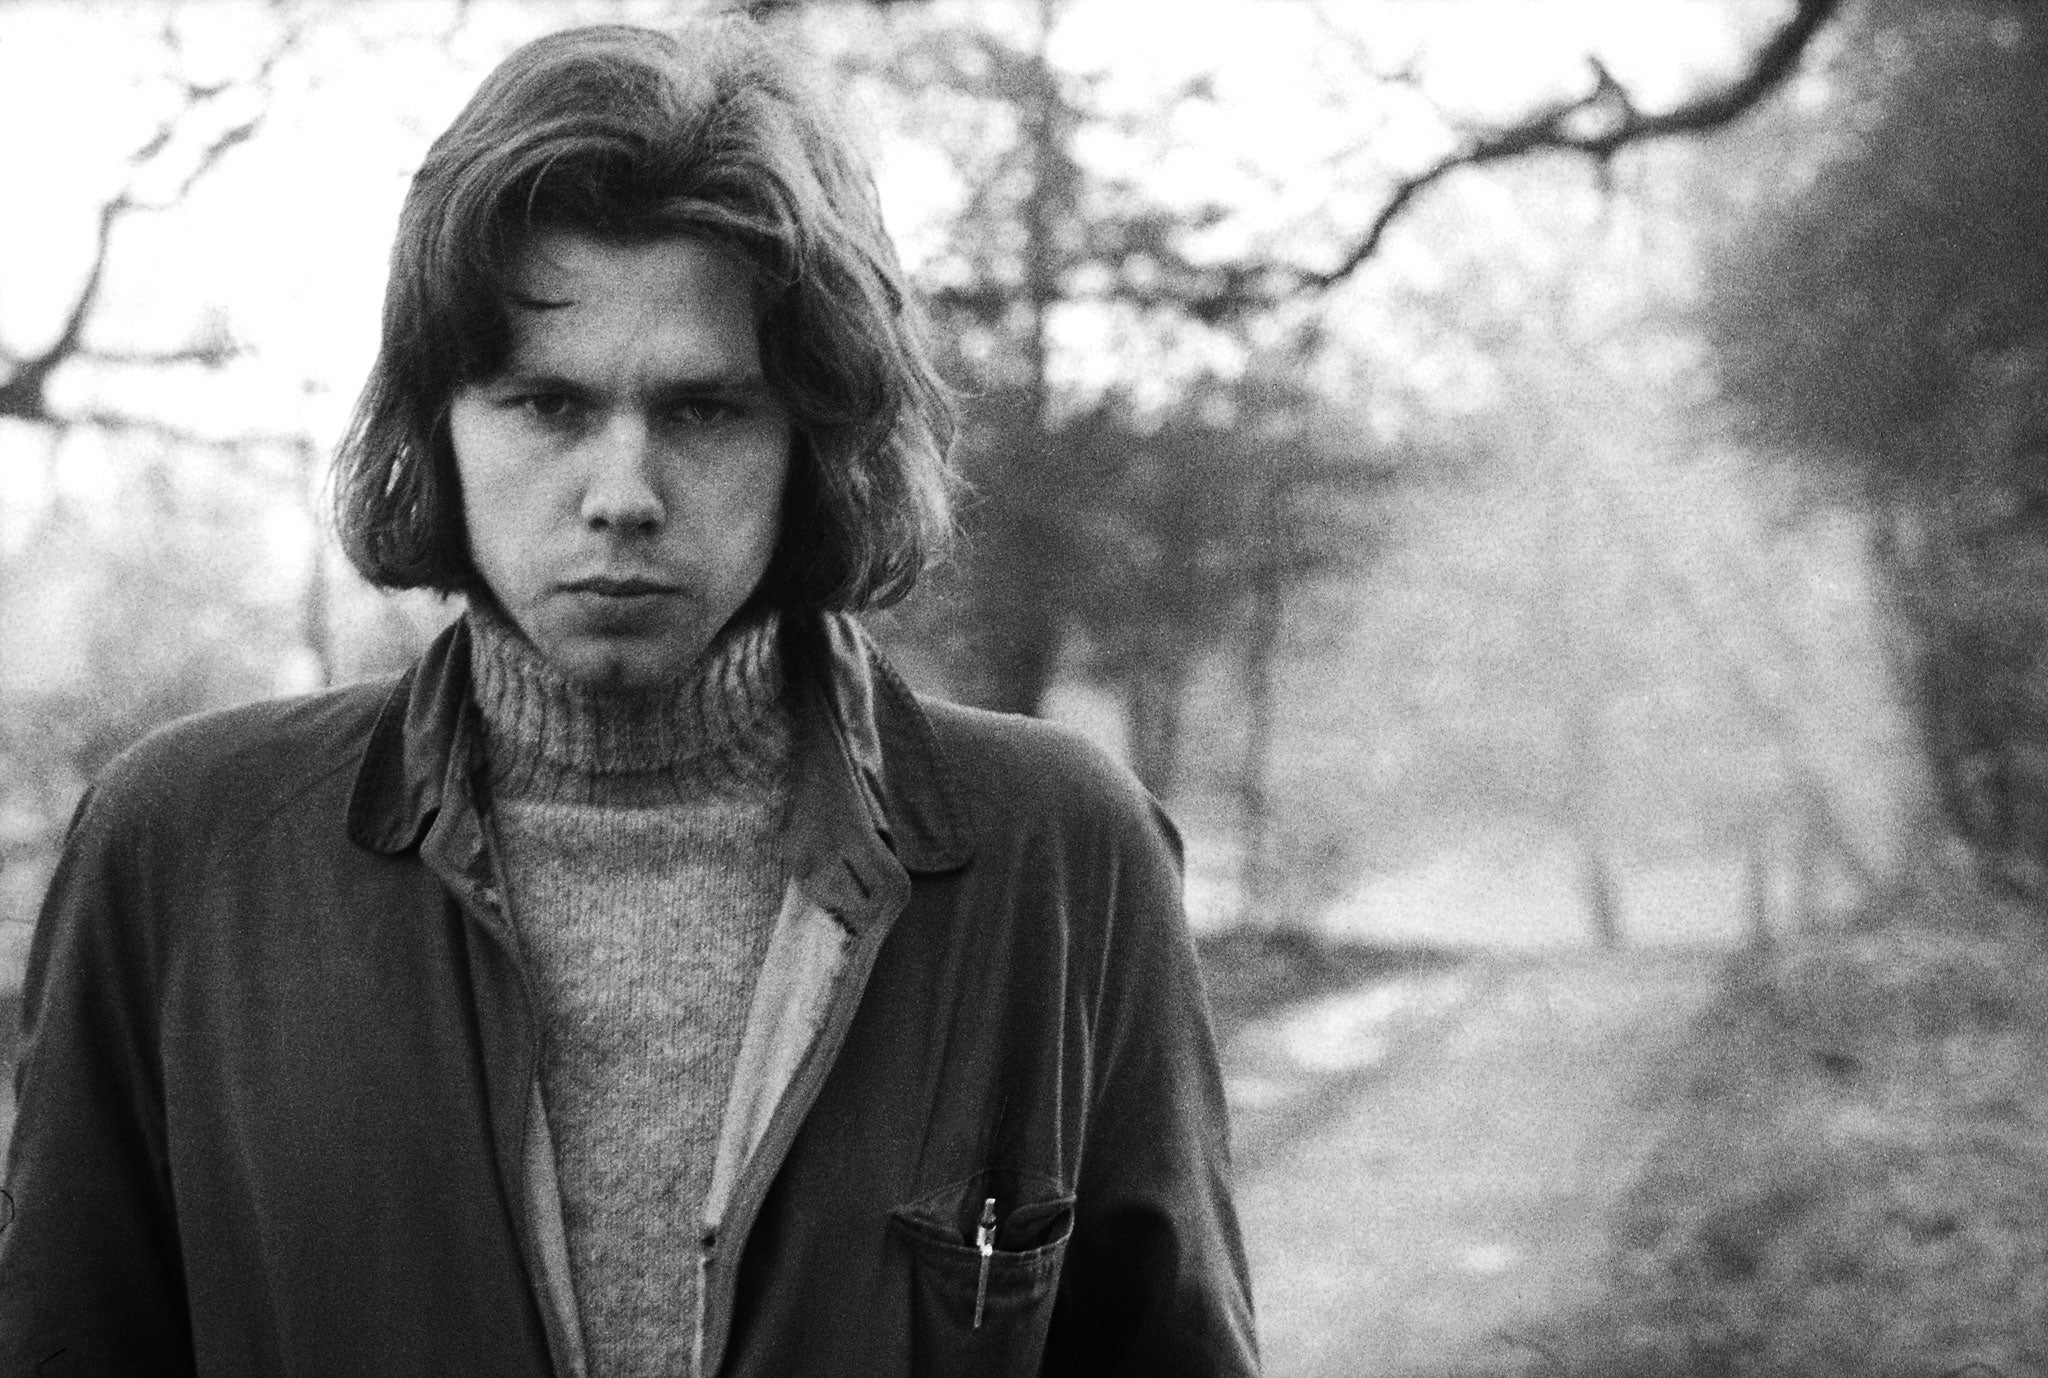 Unheard Nick Drake song released 40 years after singer's death The